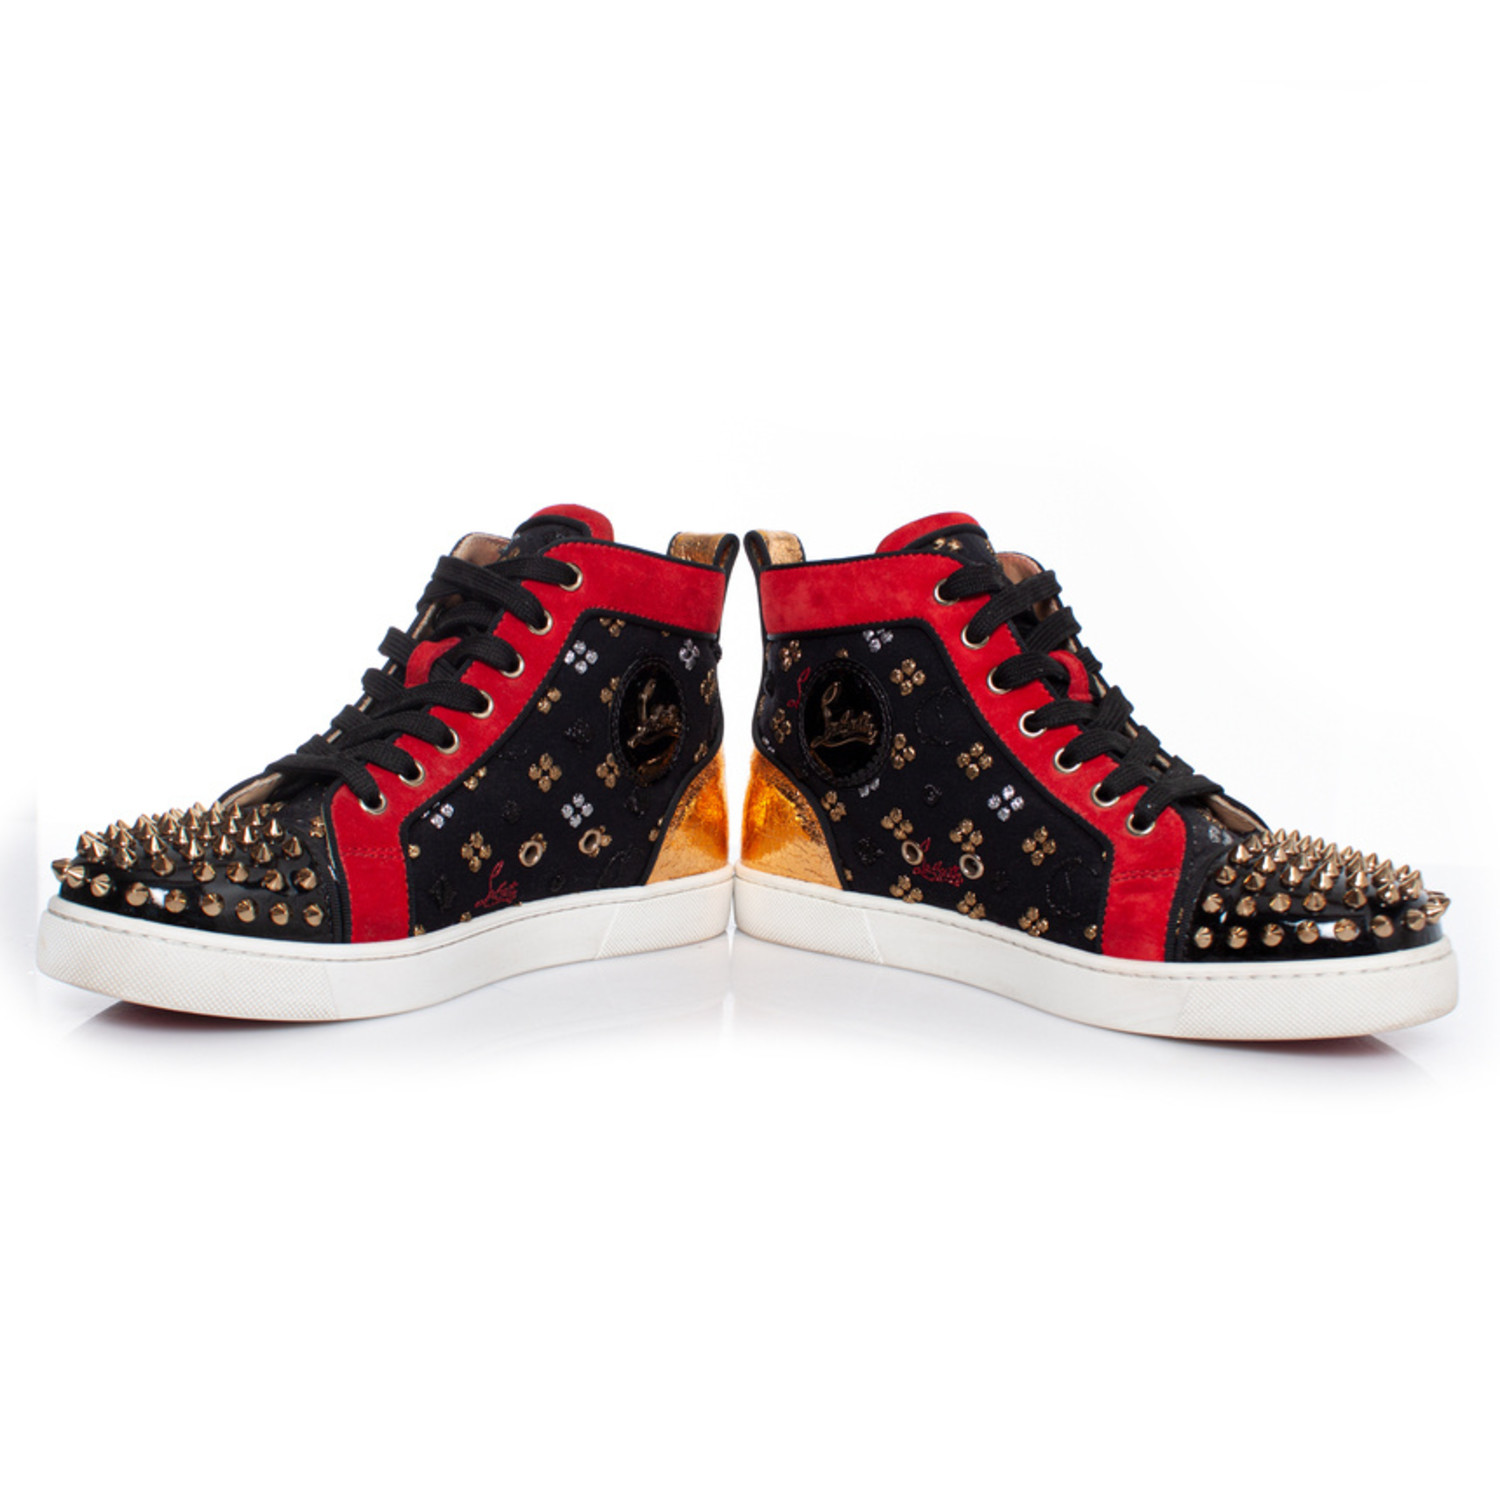 Christian Louboutin, Shoes, Louis Vuitton Mulicolor Spiked Shoes